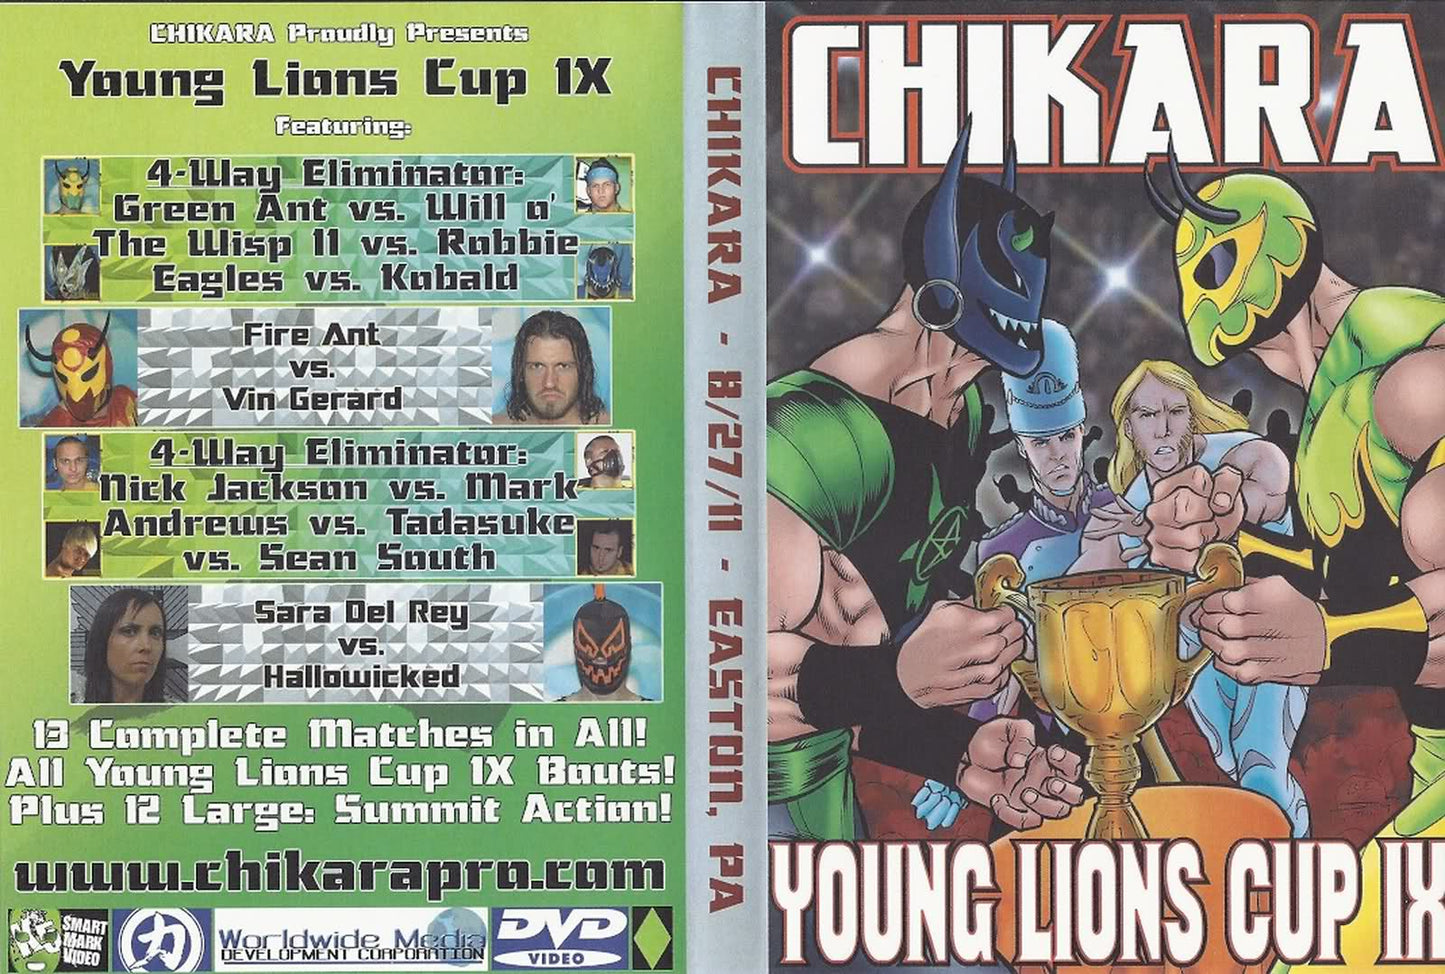 young lions cup ix